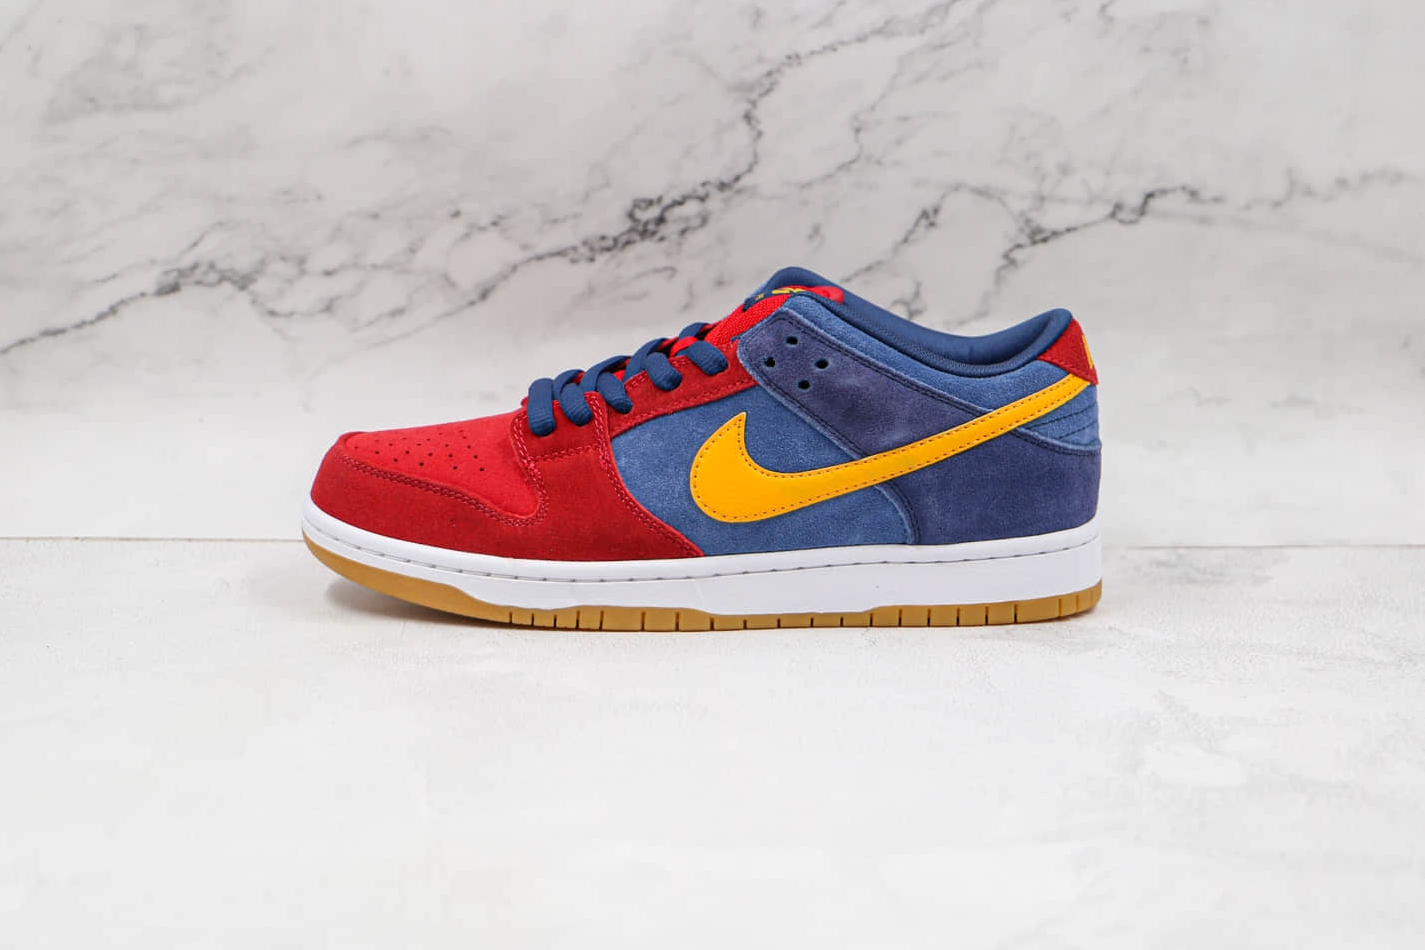 Nike Dunk Low SB 'Catalonia' DJ0606-400 - Shop the Latest Nike Dunk Collection